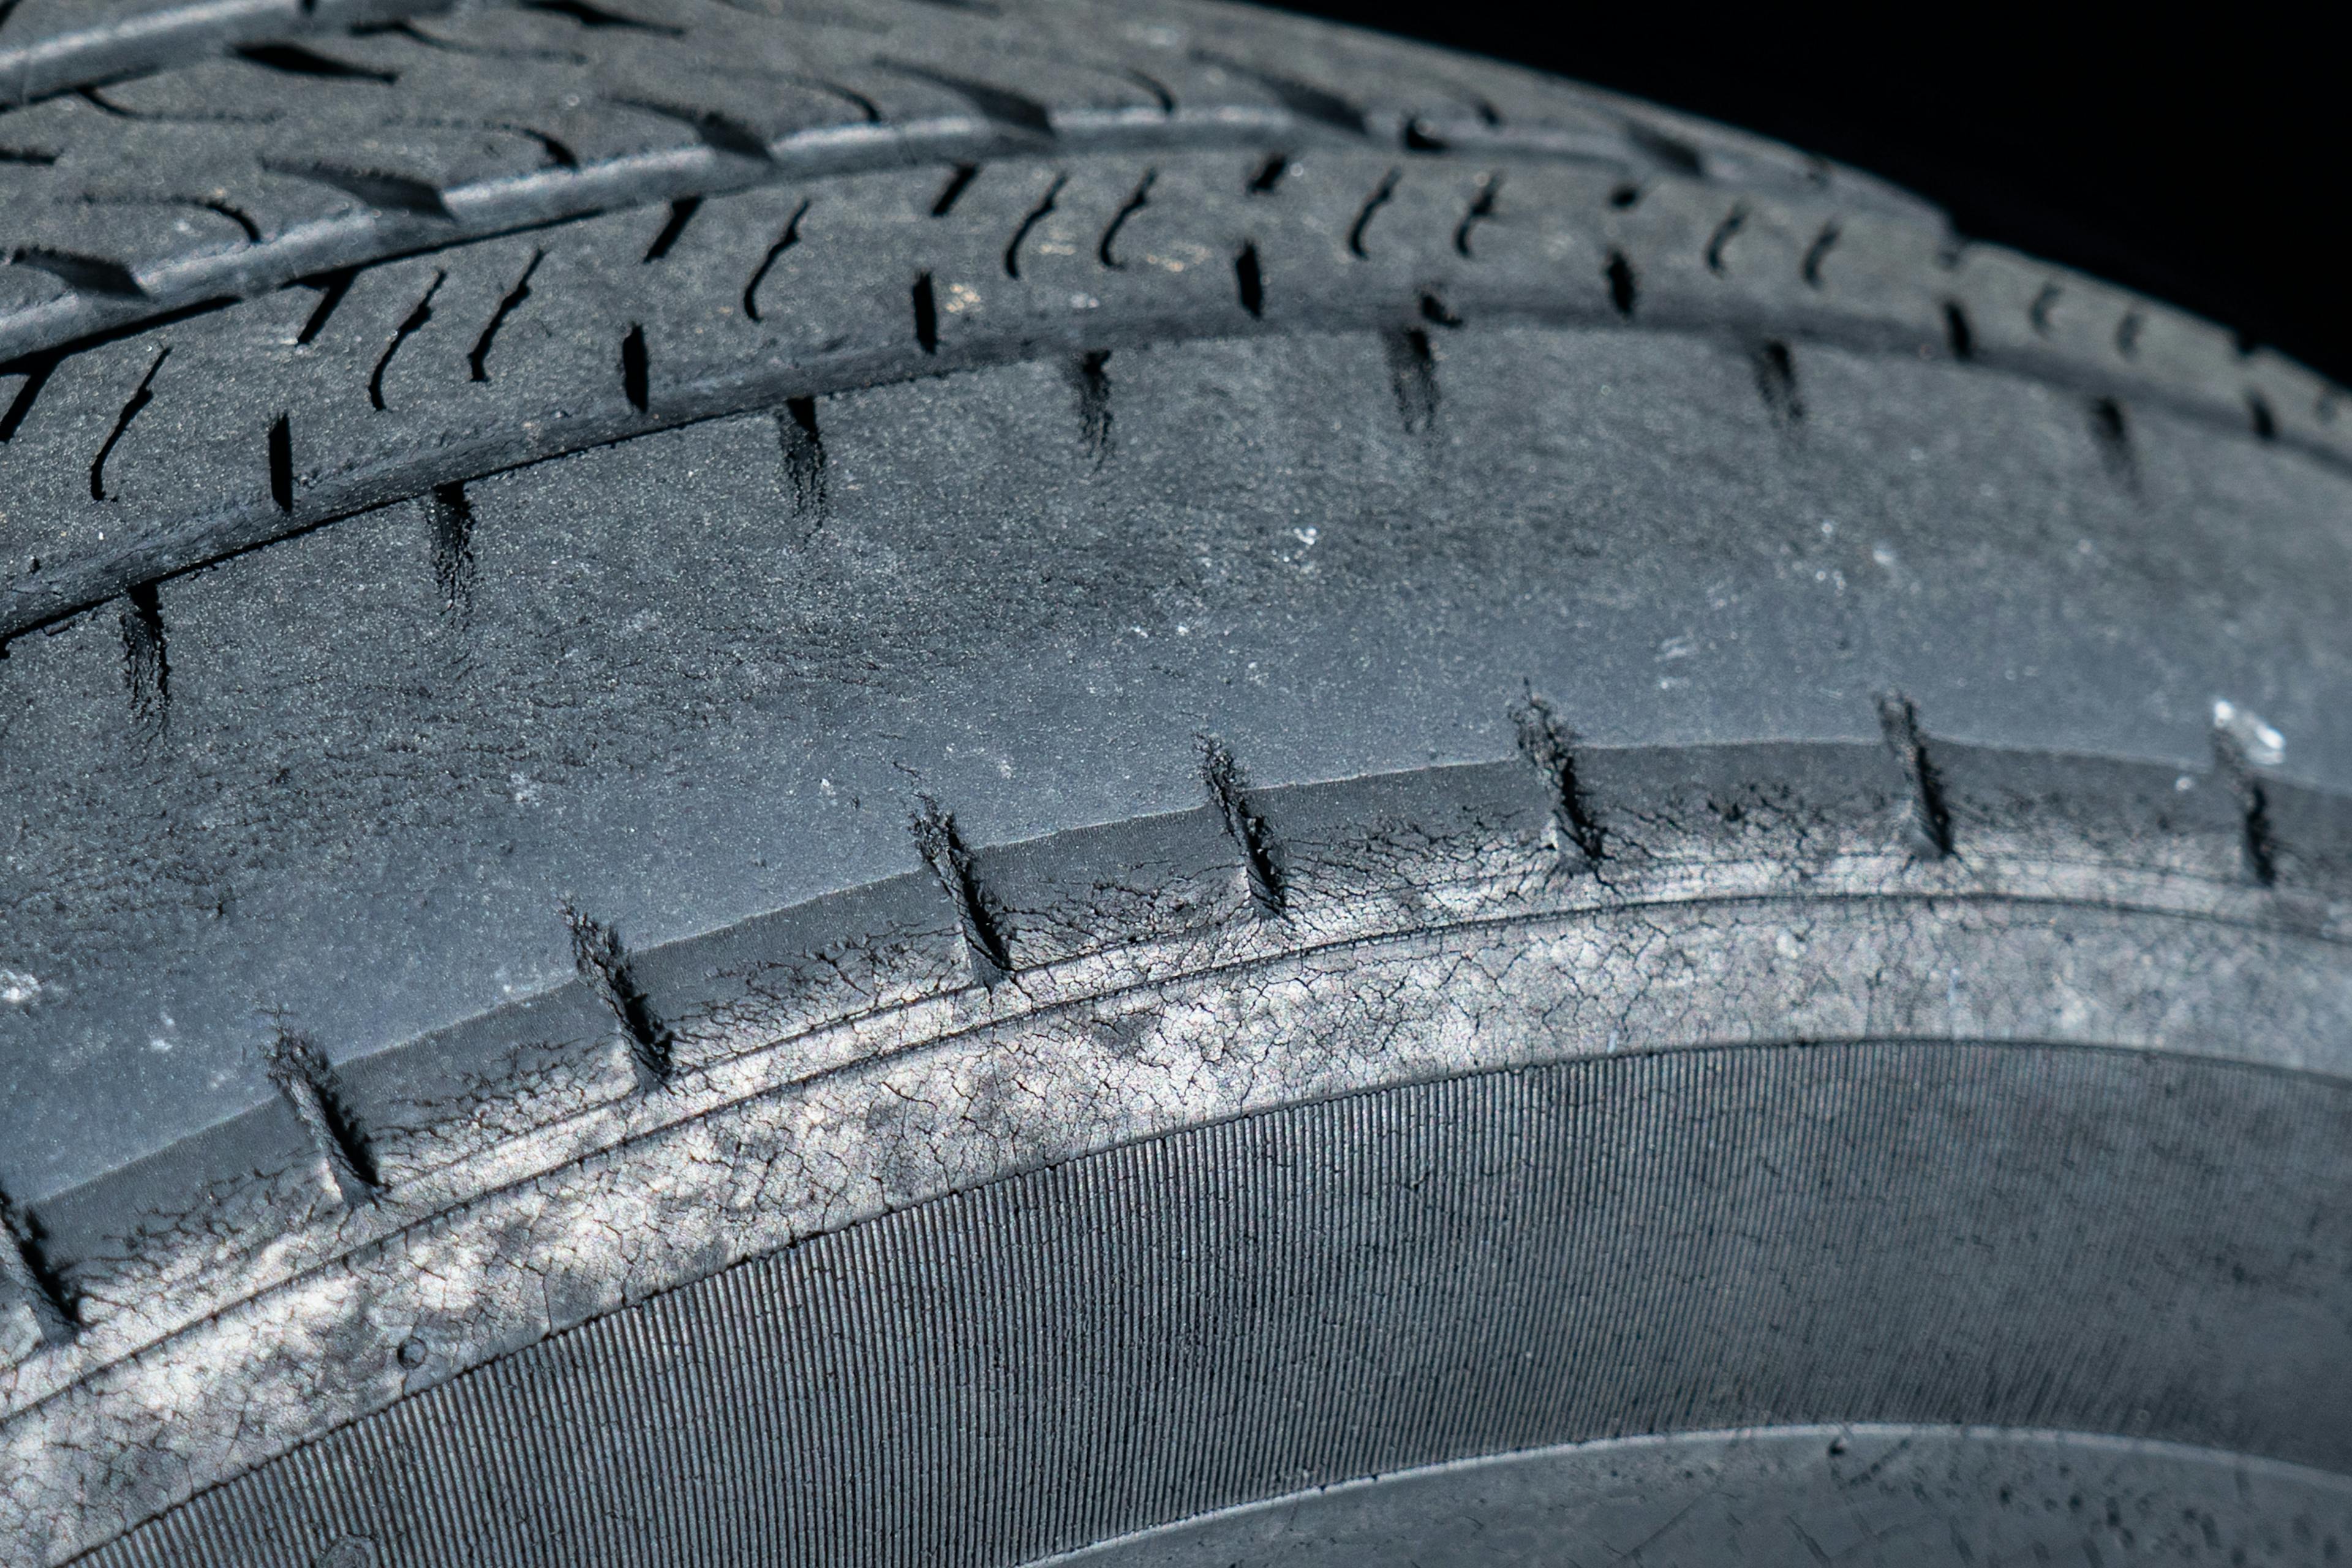 A picture of a car tyre with a worn outer edge caused by bad wheel alignment